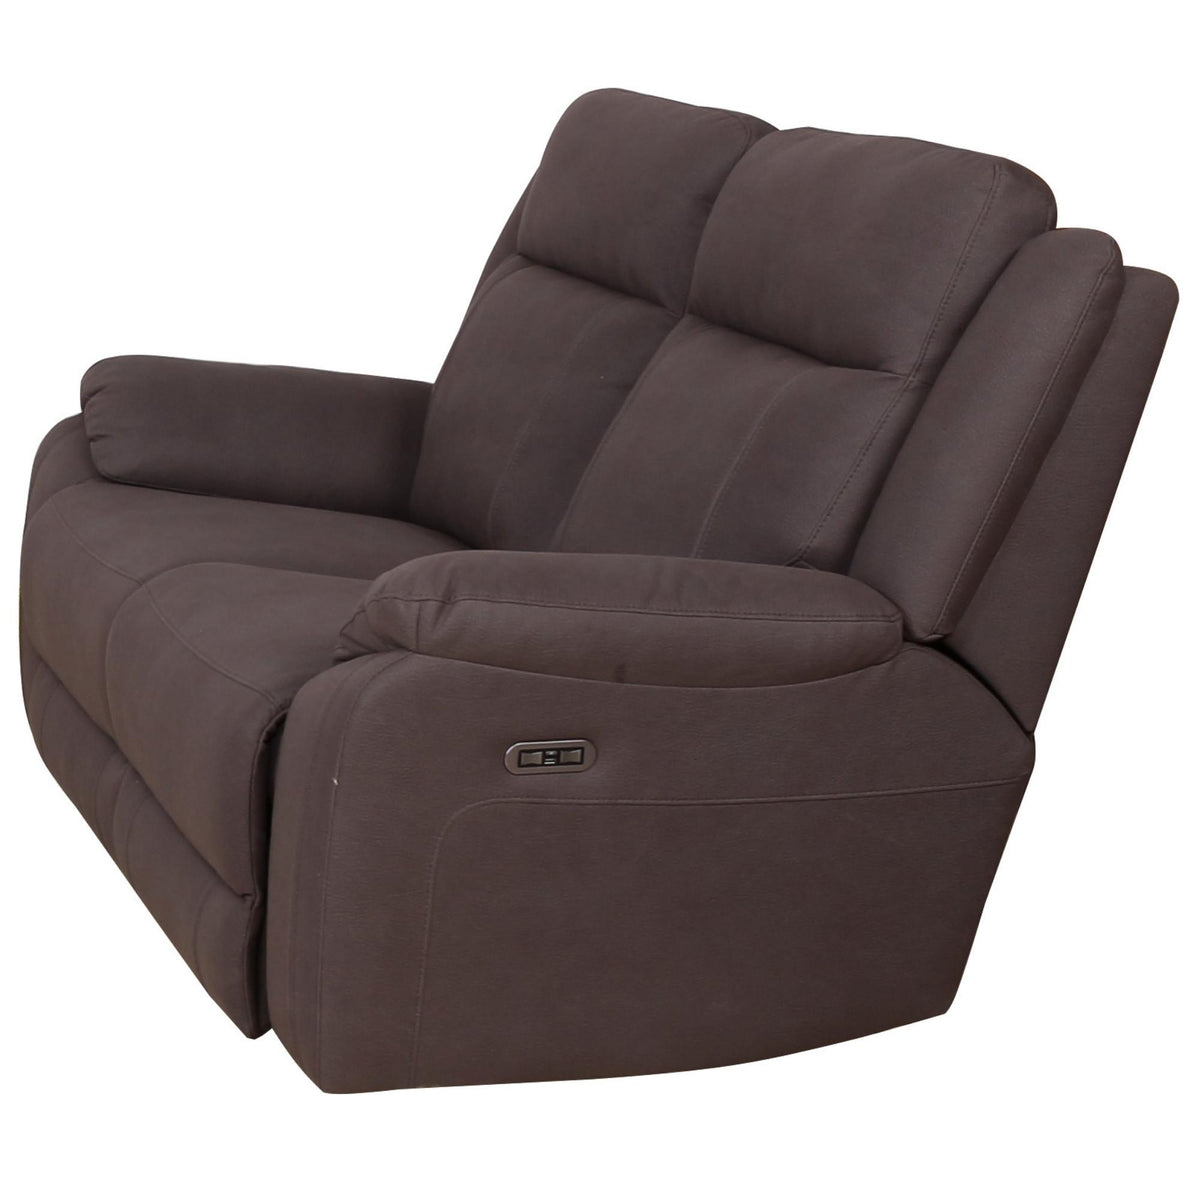 Victor 2 Seater Electric Recliner Sofa Chair Home Theatre Lounge - Grey